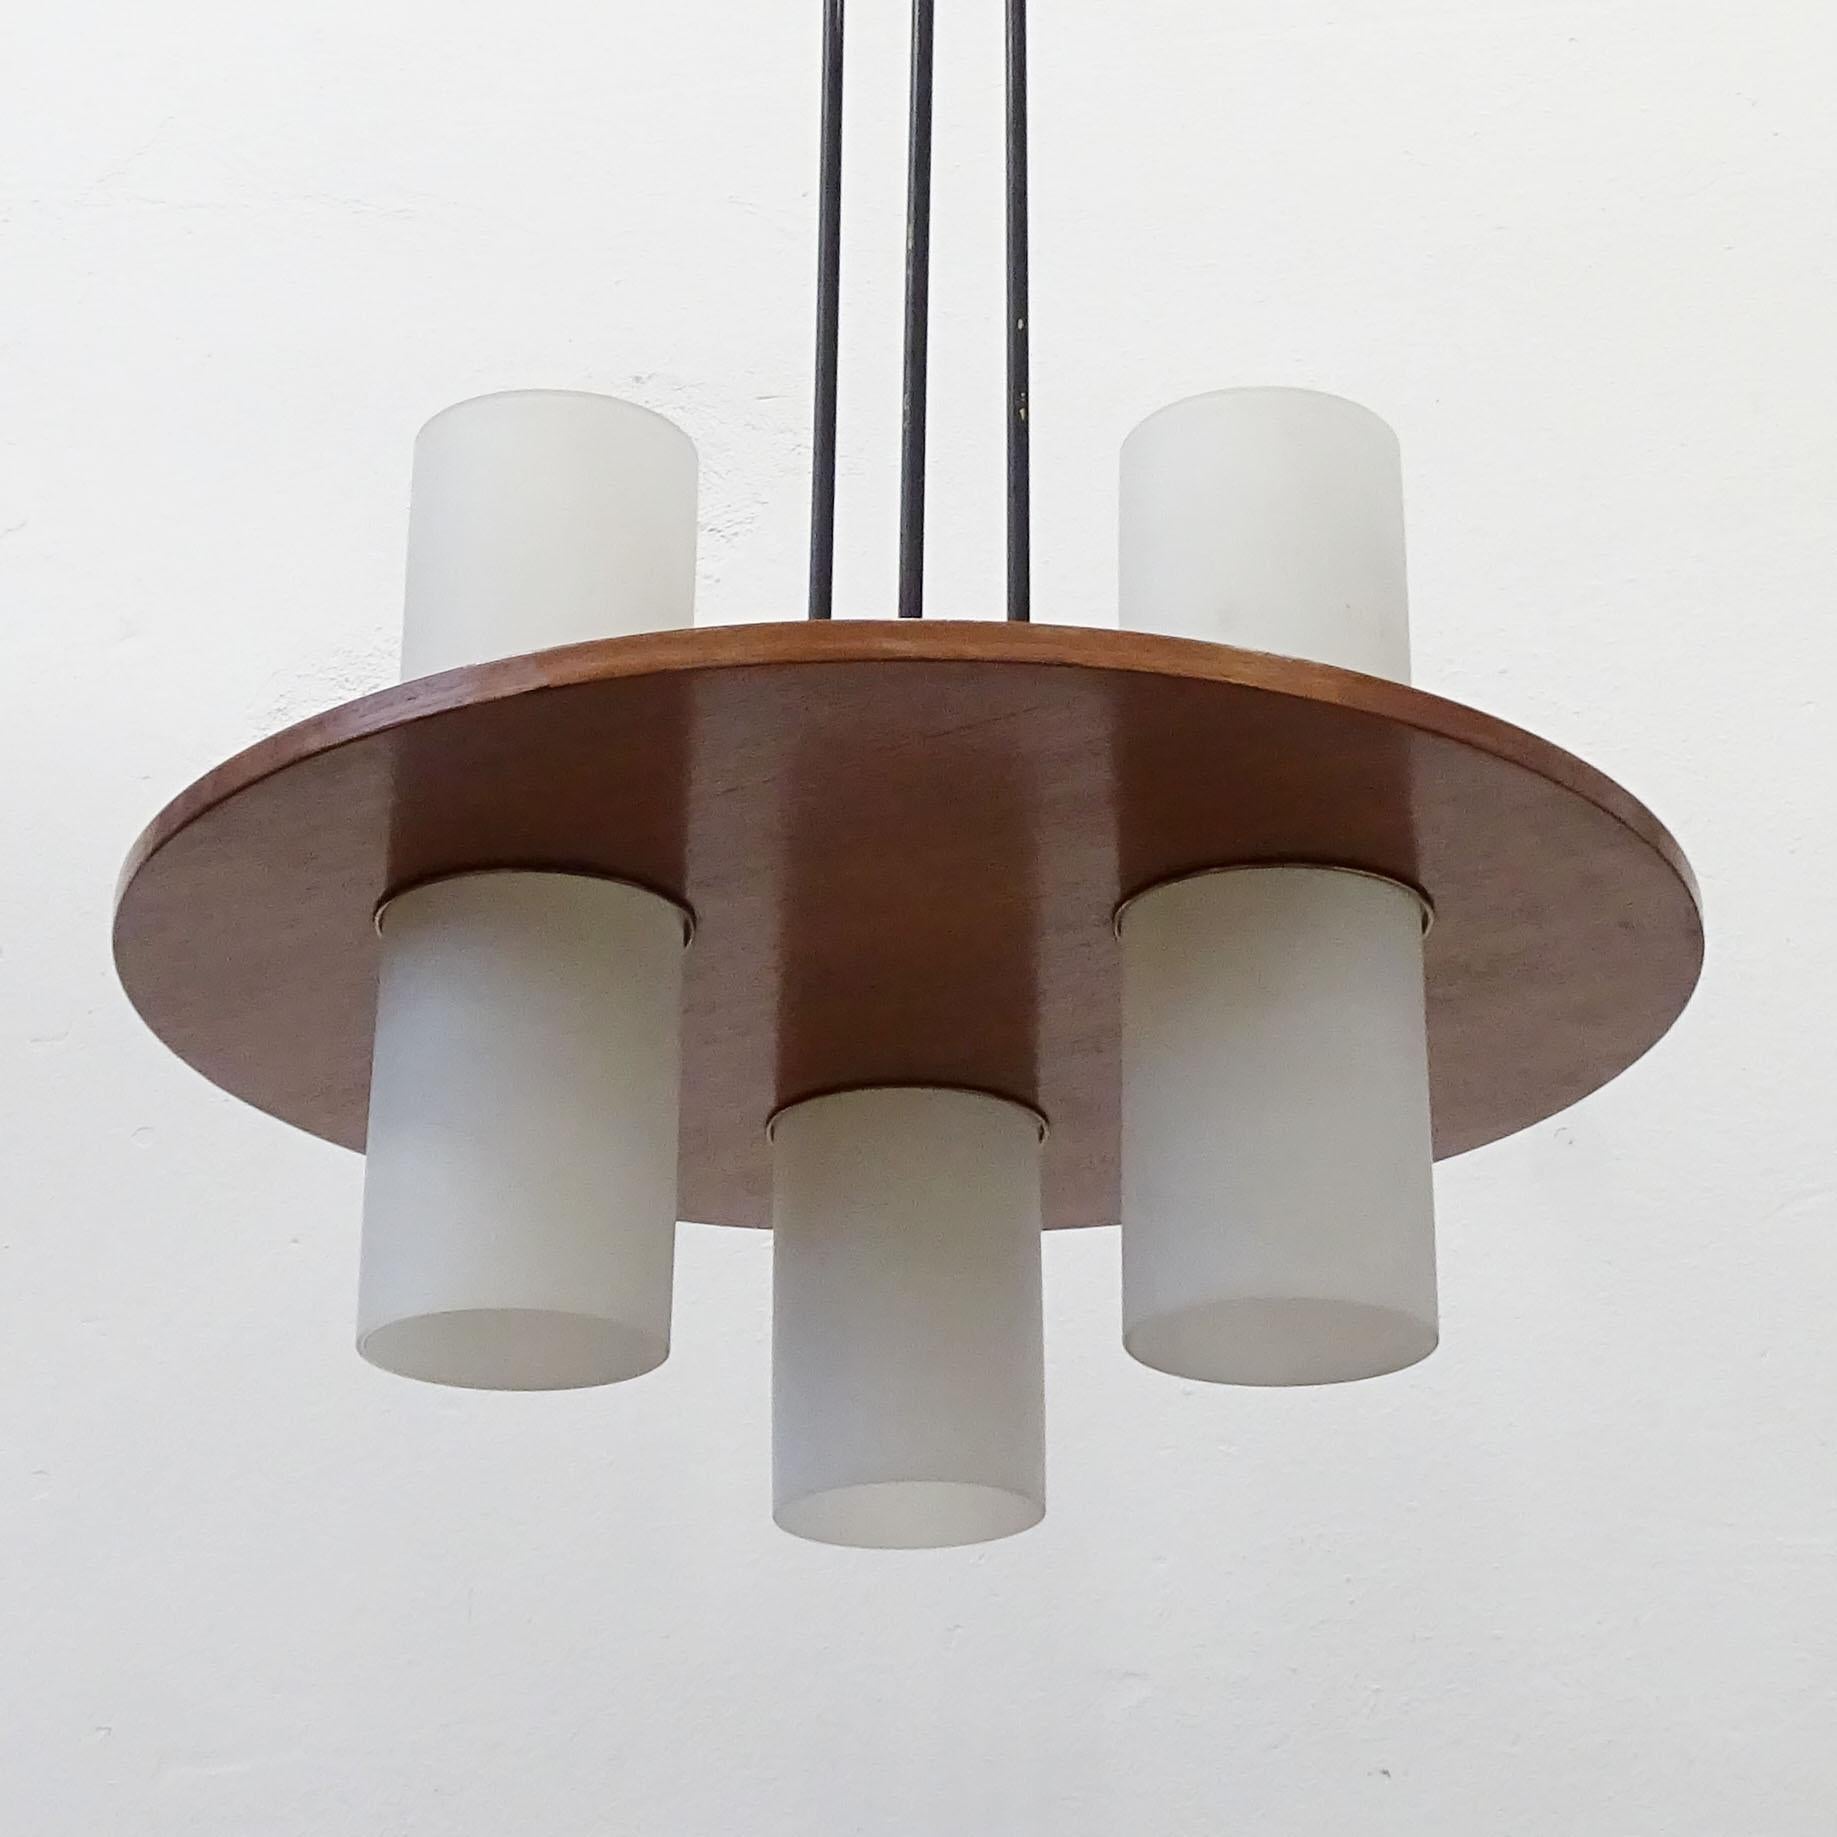 Elegant Italian 1950s Teak and Opaline Glass Cylinders Ceiling Lamp In Good Condition For Sale In Milan, IT